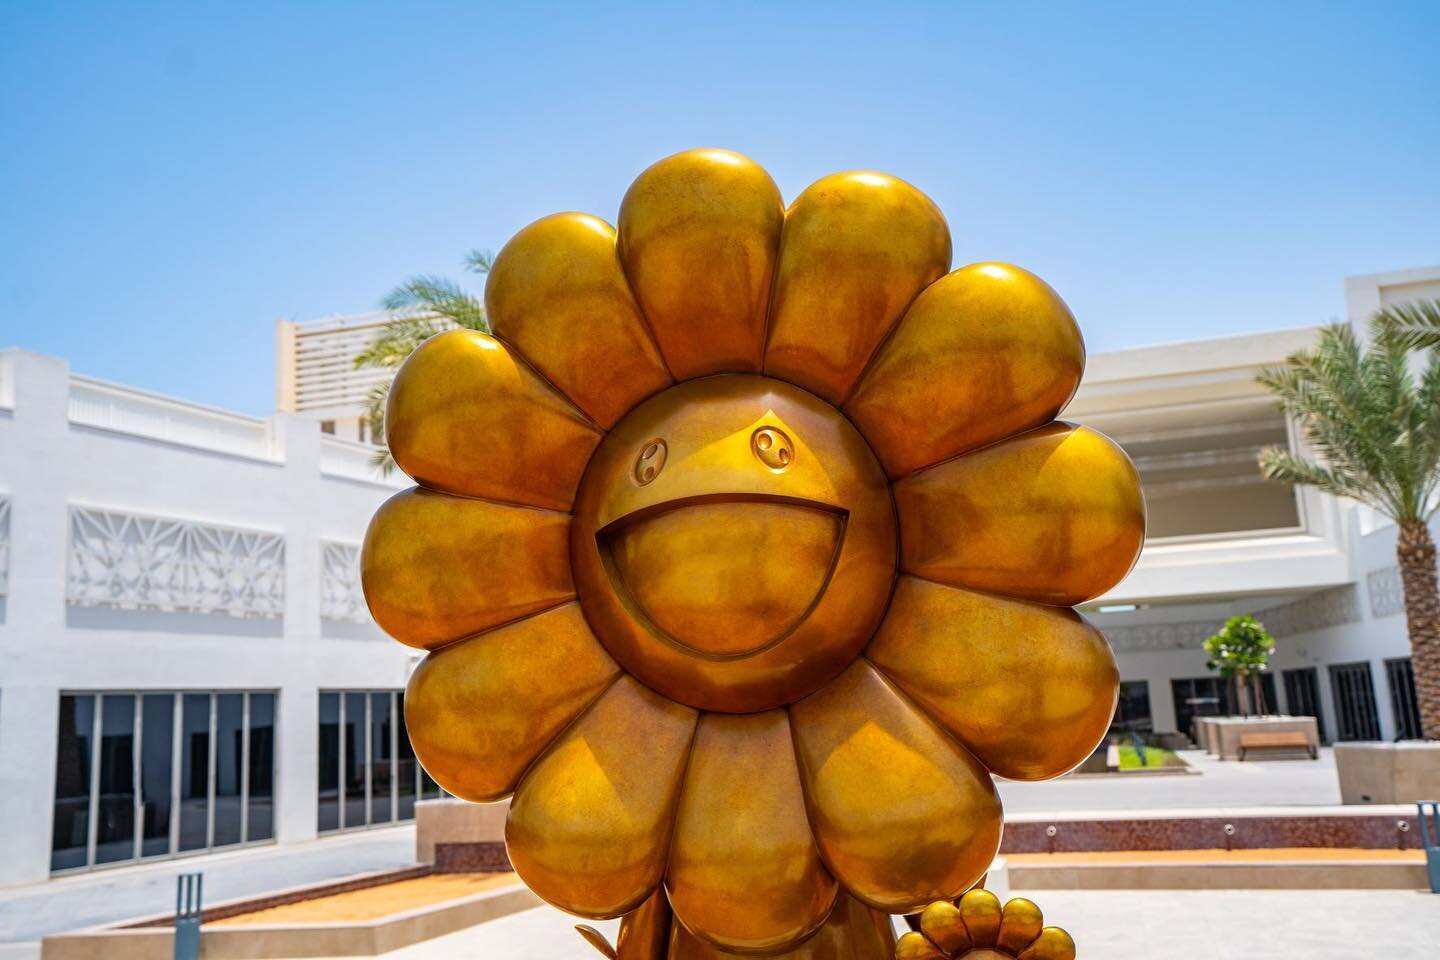 Flower Parent and Child sculpture by @takashipom
 
.
The following sculpture created by the Japanese artist Takashi Murakami @takashipom is located in Yas Bay, Abu Dhabi.
.
The Flower Parent and Child sculpture is a metallic and gold leaf piece stand